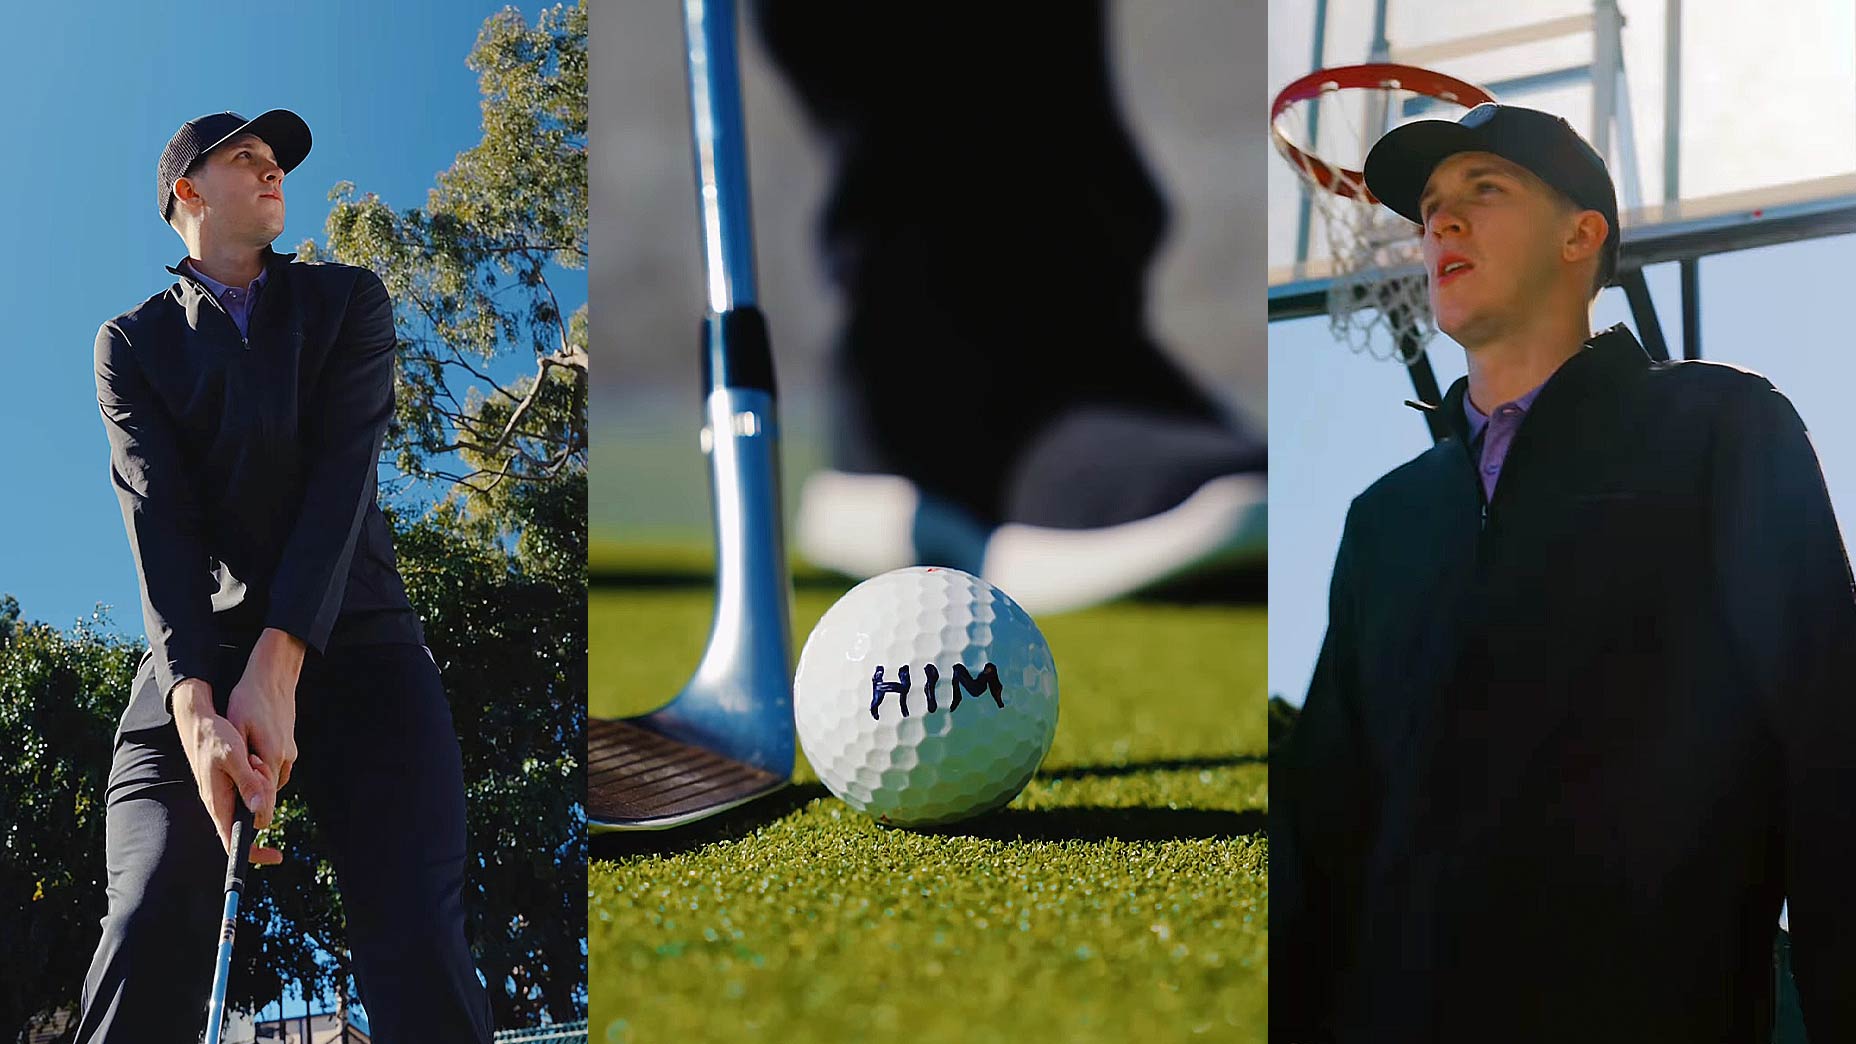 Three images of NBA player Austin Reaves playing golf